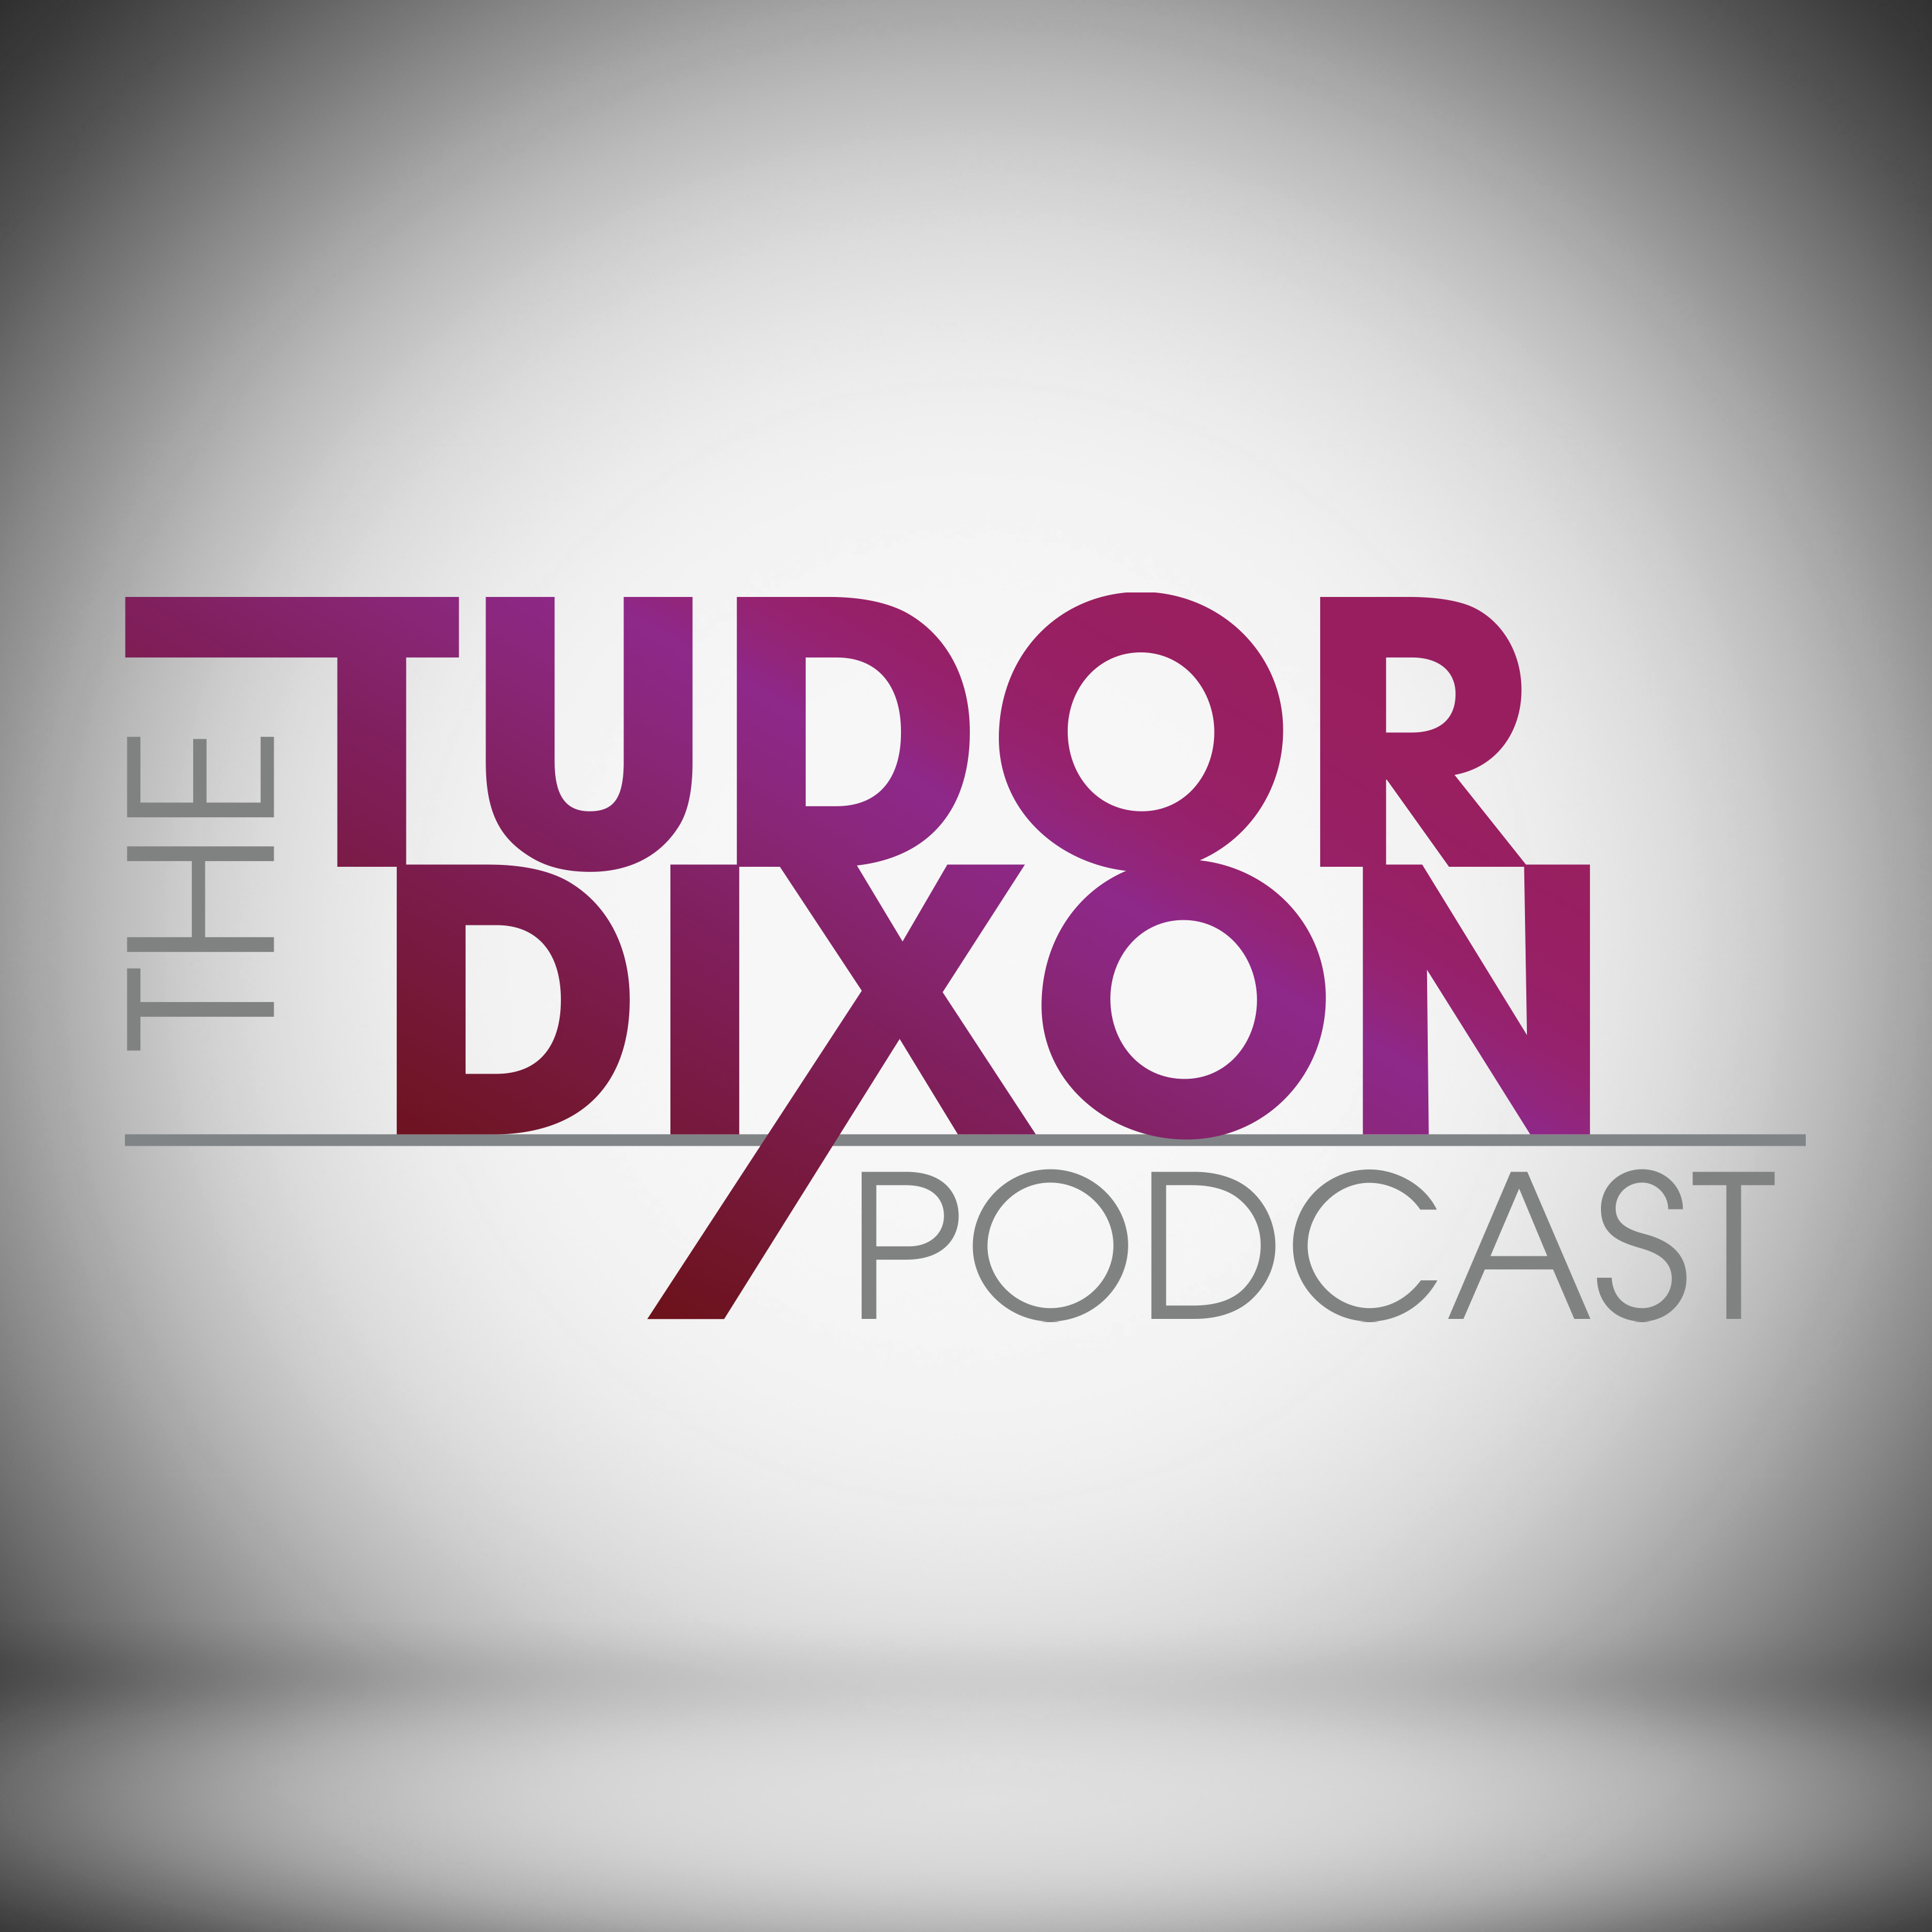 The Tudor Dixon Podcast: An Exclusive Interview with President Donald Trump